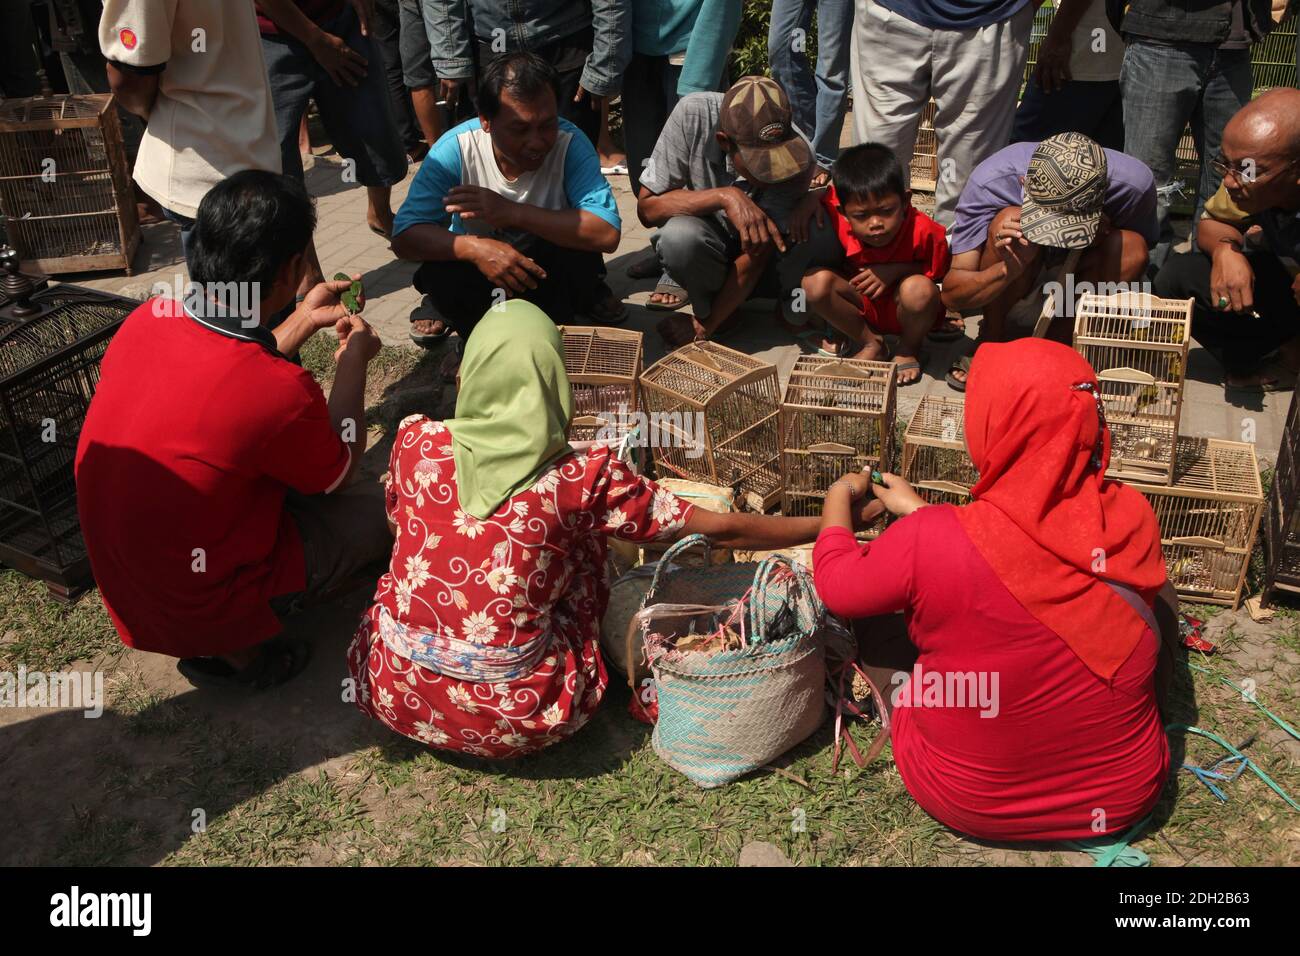 People sit in front of the bird cages at the bird market in Yogyakarta in Central Java, Indonesia. Stock Photo